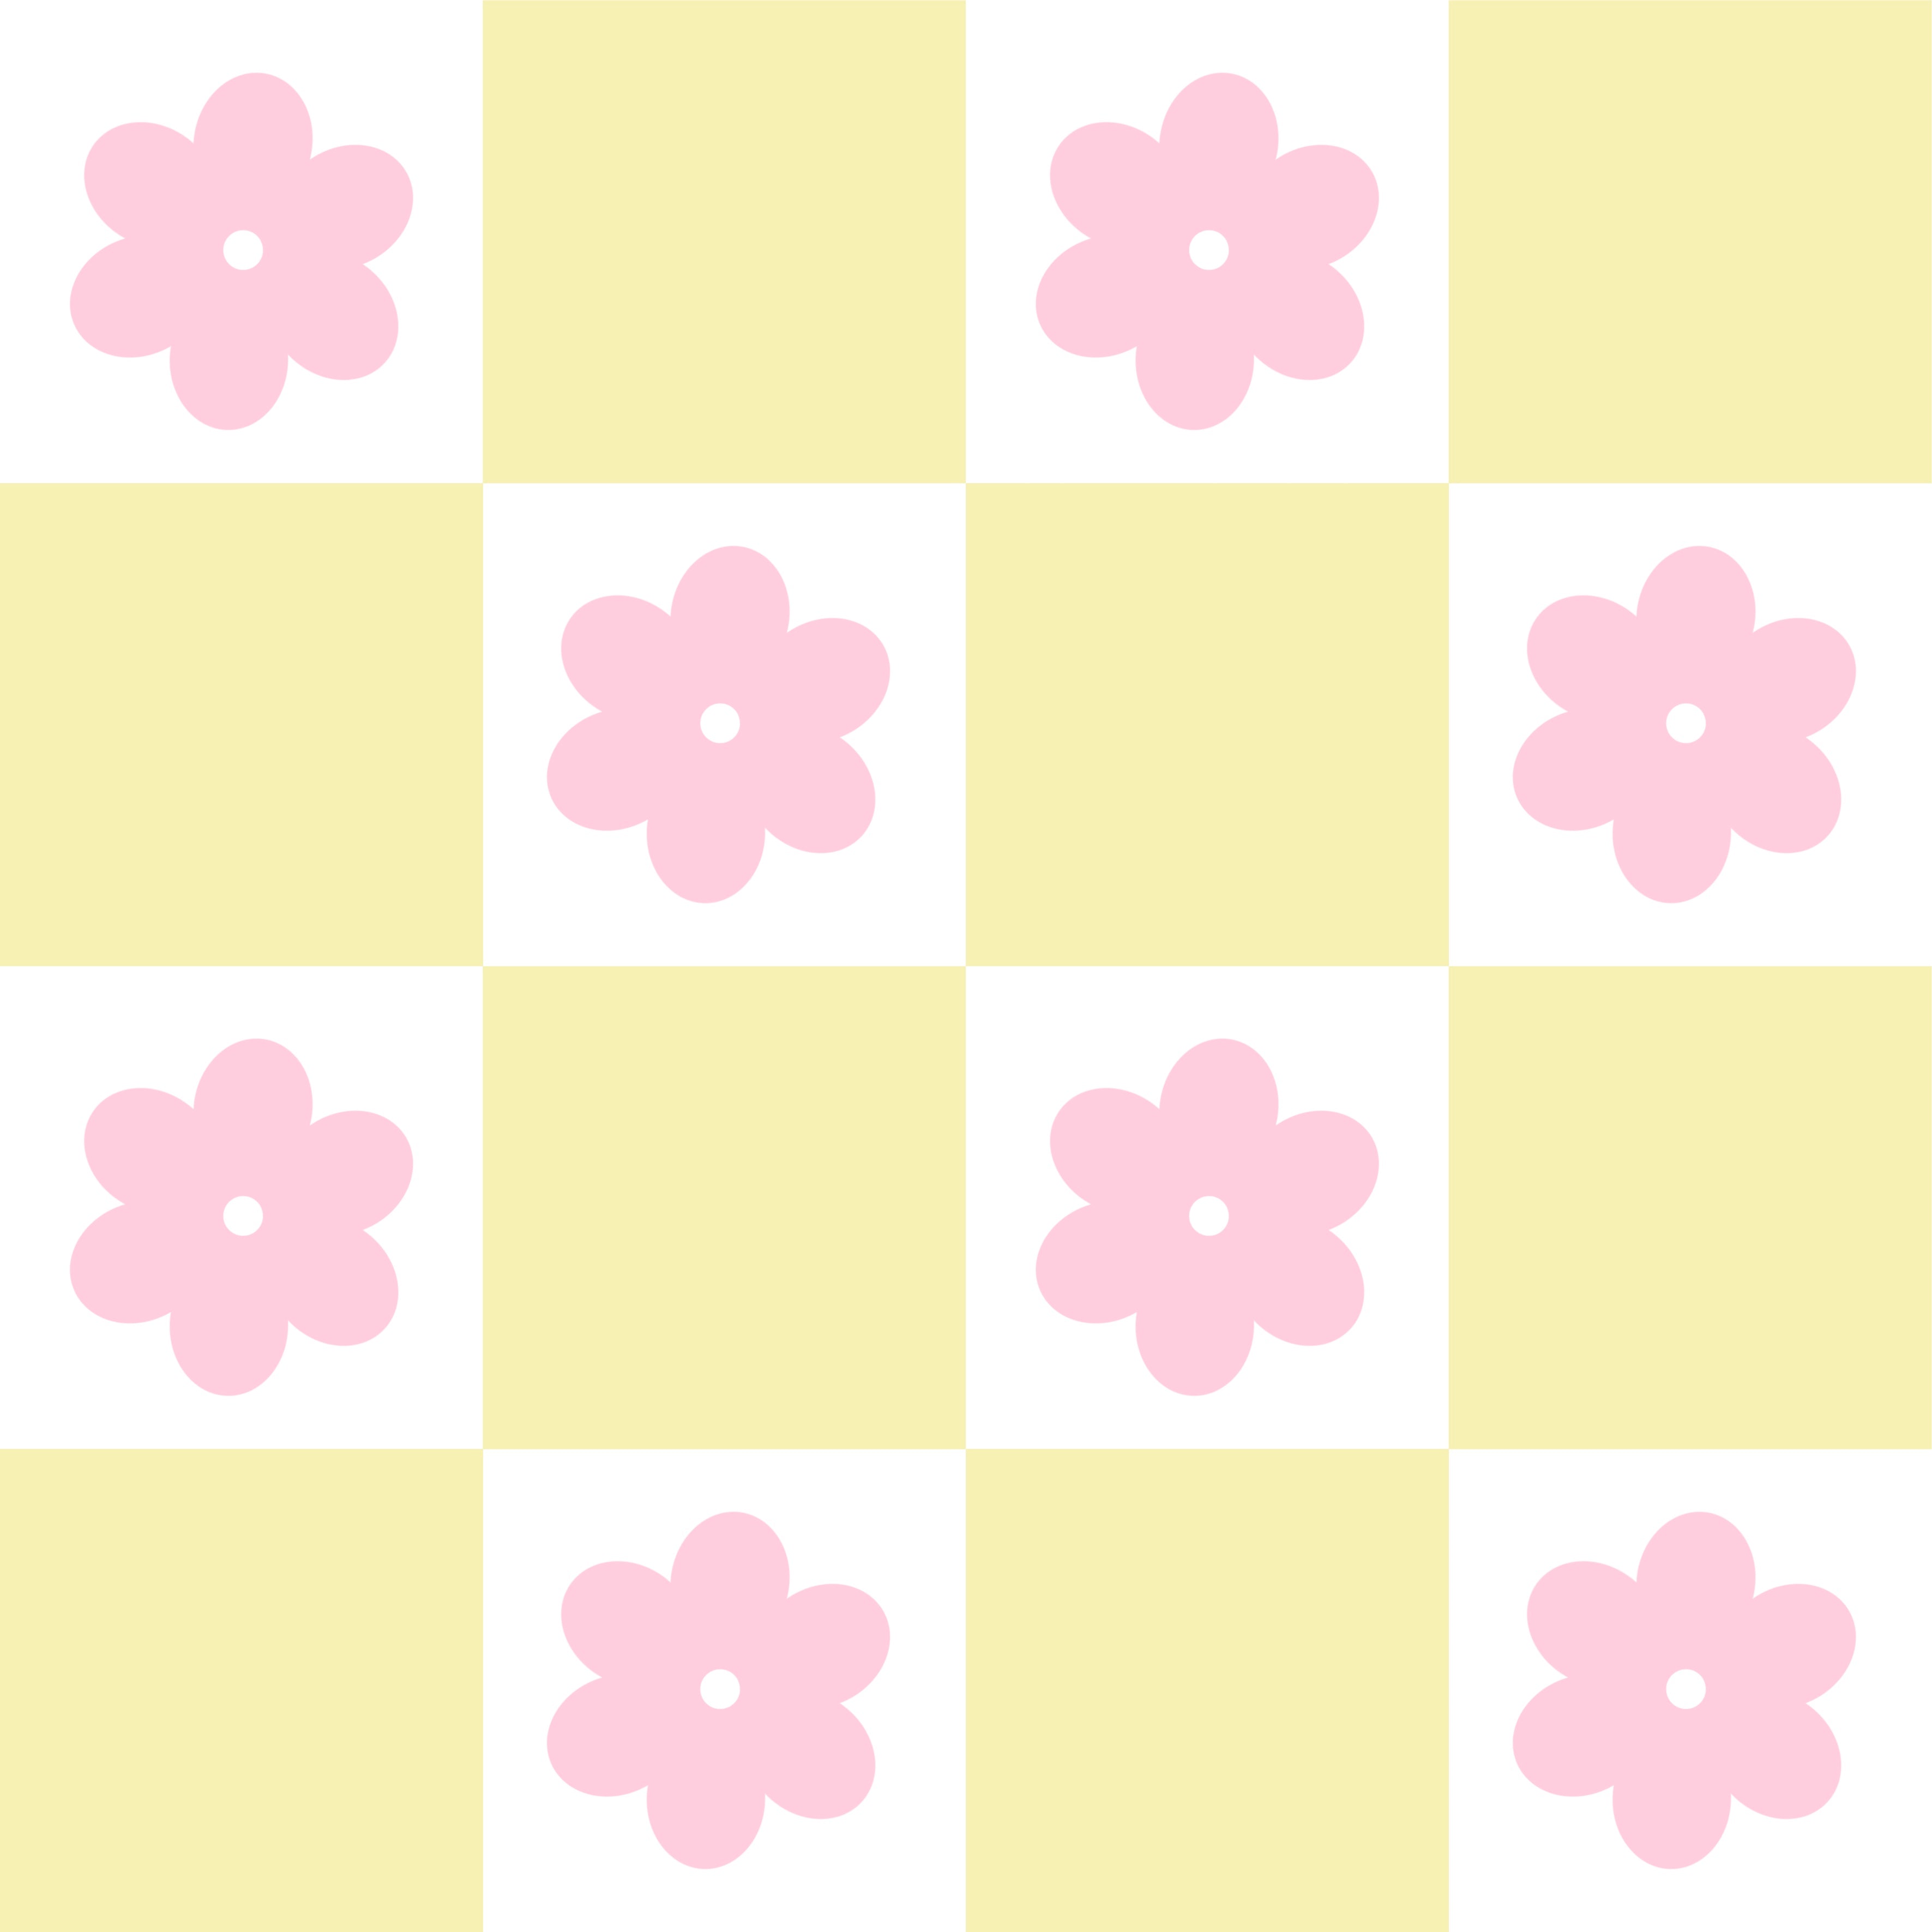 Wallpaper Pink and White Checkered Textile Background  Download Free Image